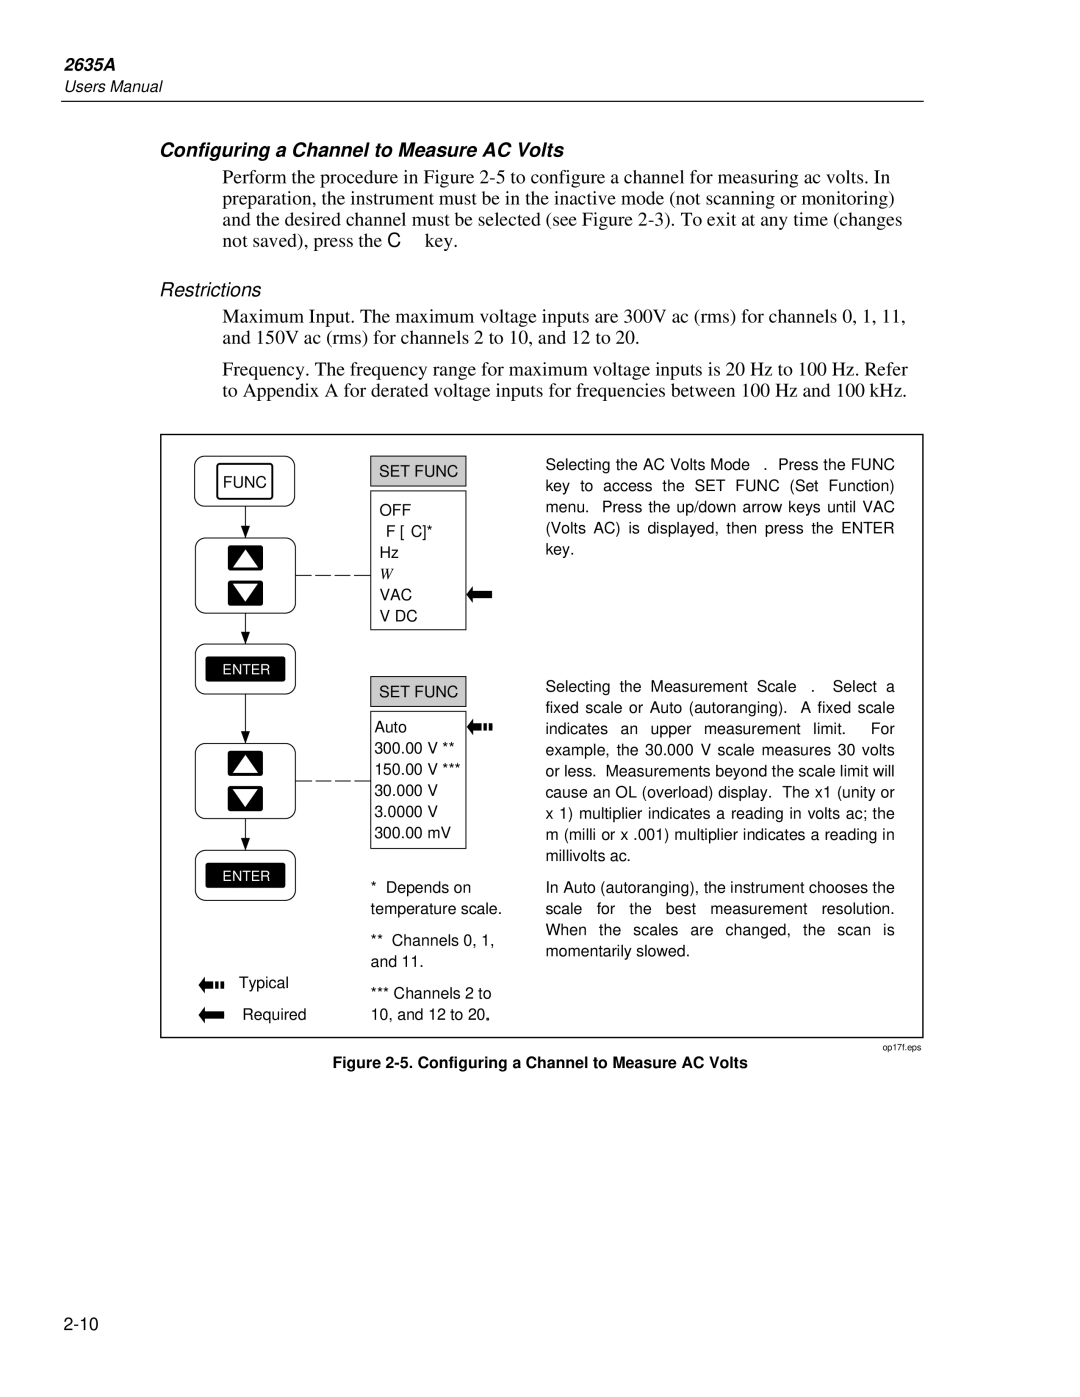 Fluke 2635A user manual Configuring a Channel to Measure AC Volts 